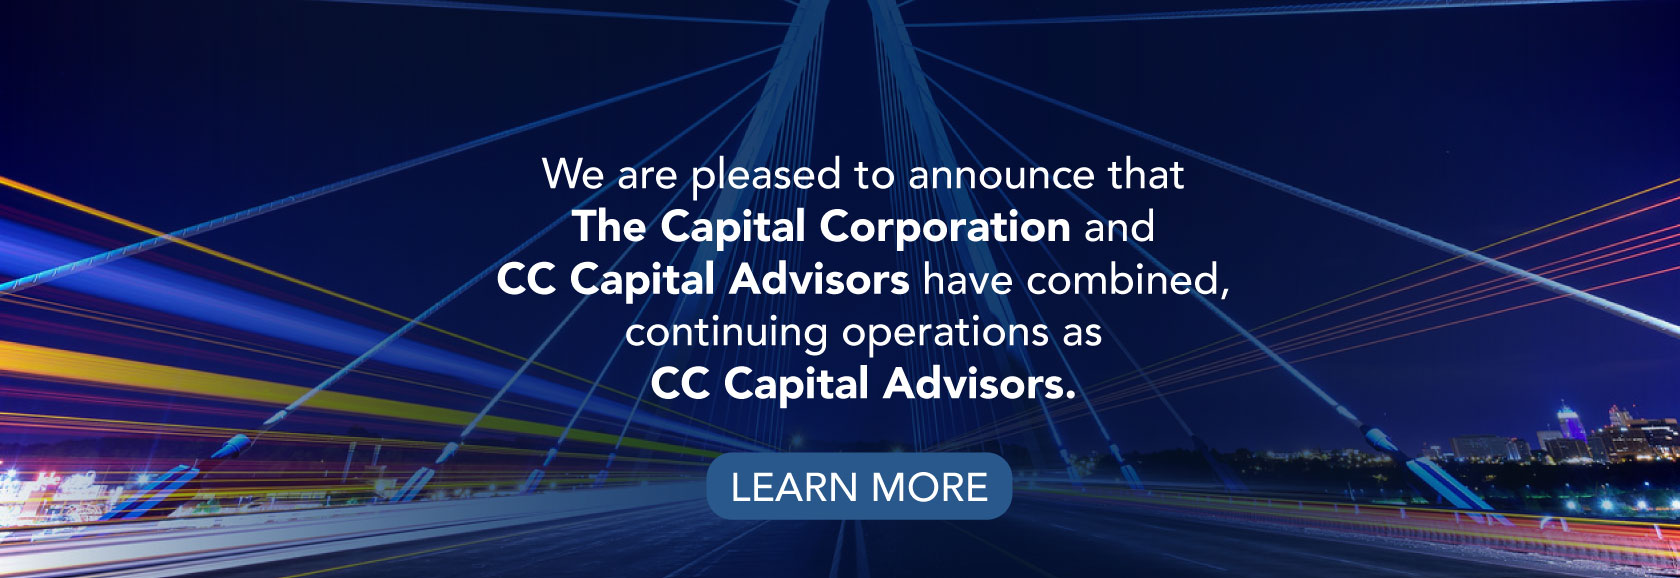 The Capital Corporation and CC Capital Advisors have combined